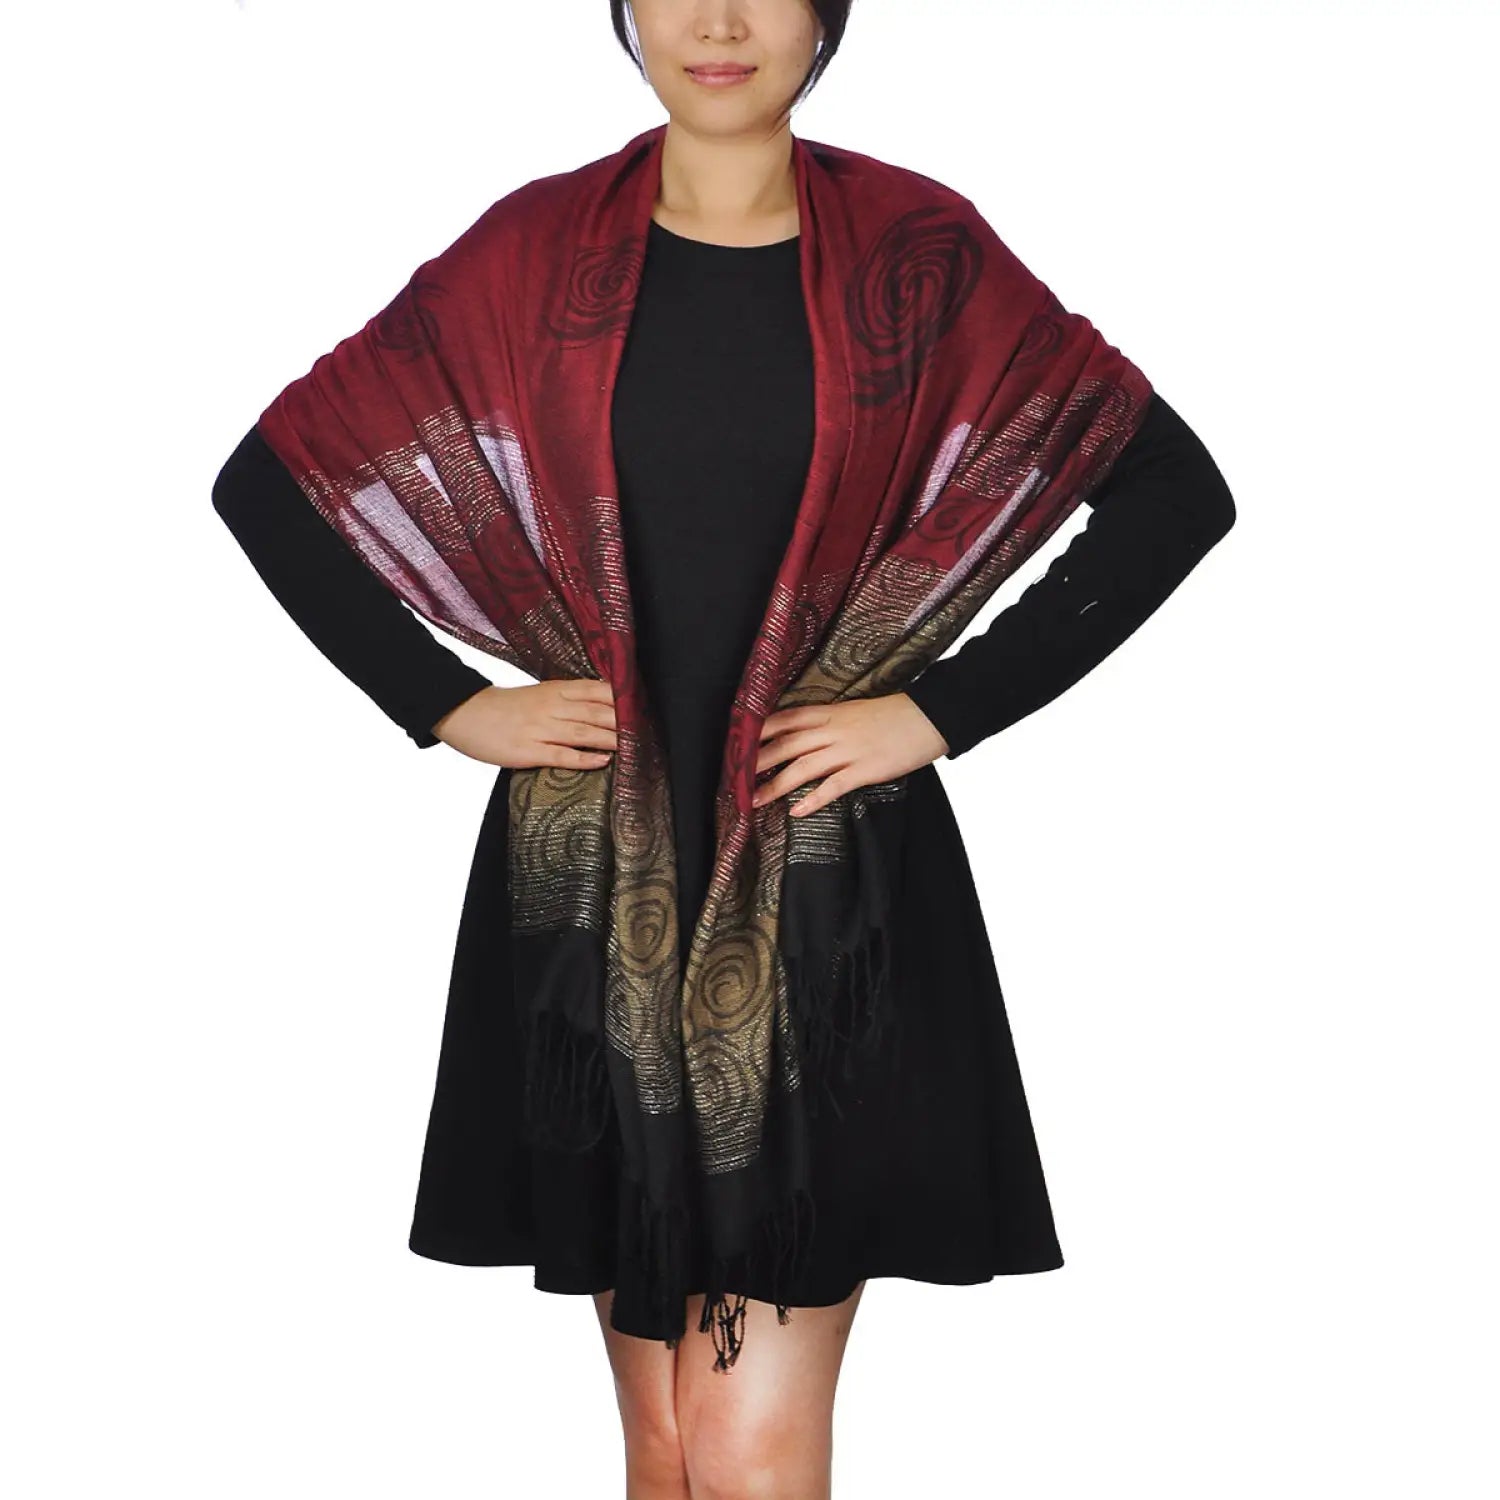 Stylish woman in red and gold scarf from Glittery Two-Tone Ombre Tasselled Scarf Shawl